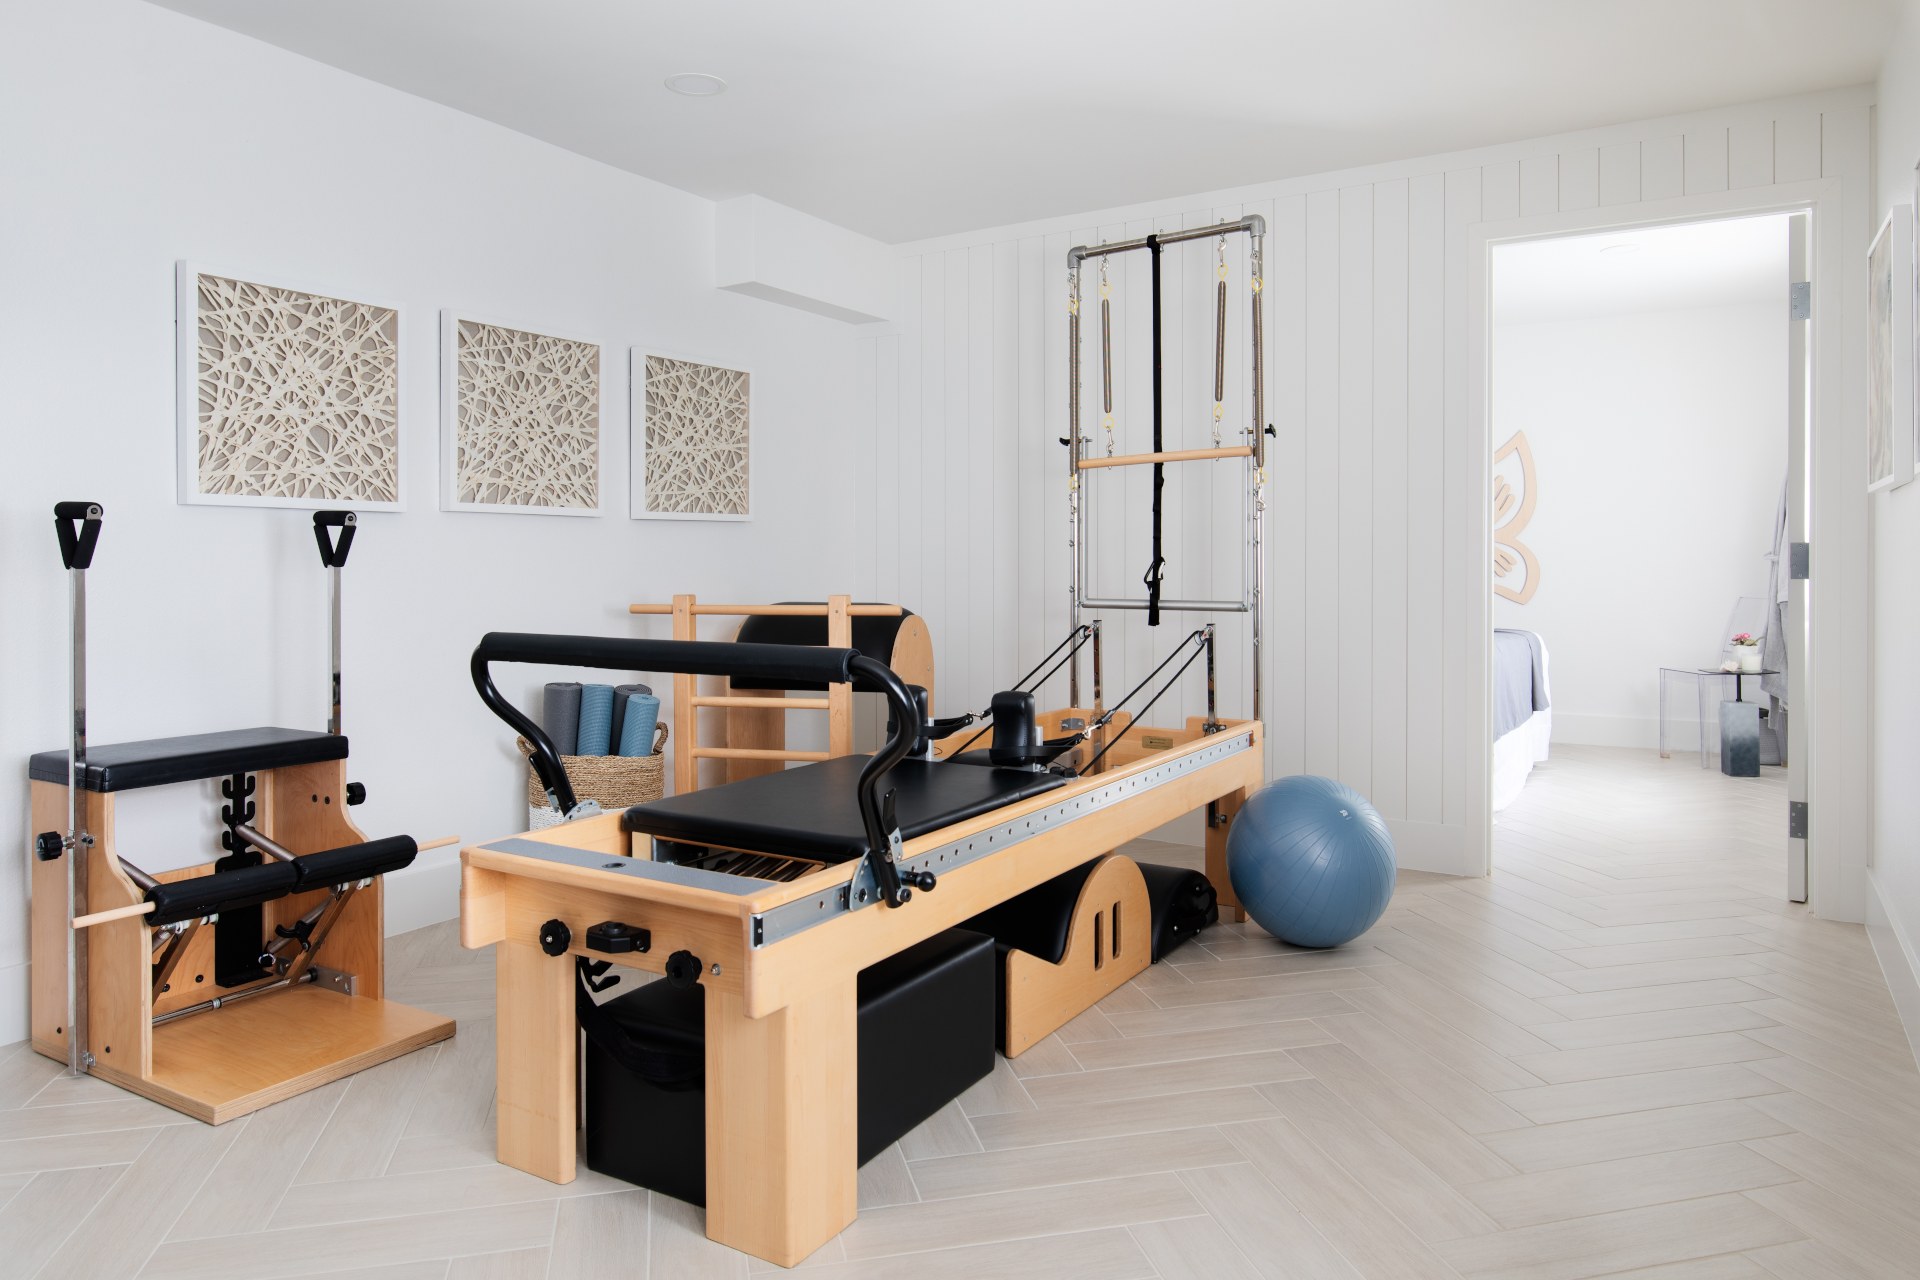 Pilates & Yoga therapy area at Ananda Physical Therapy, Austin TX.